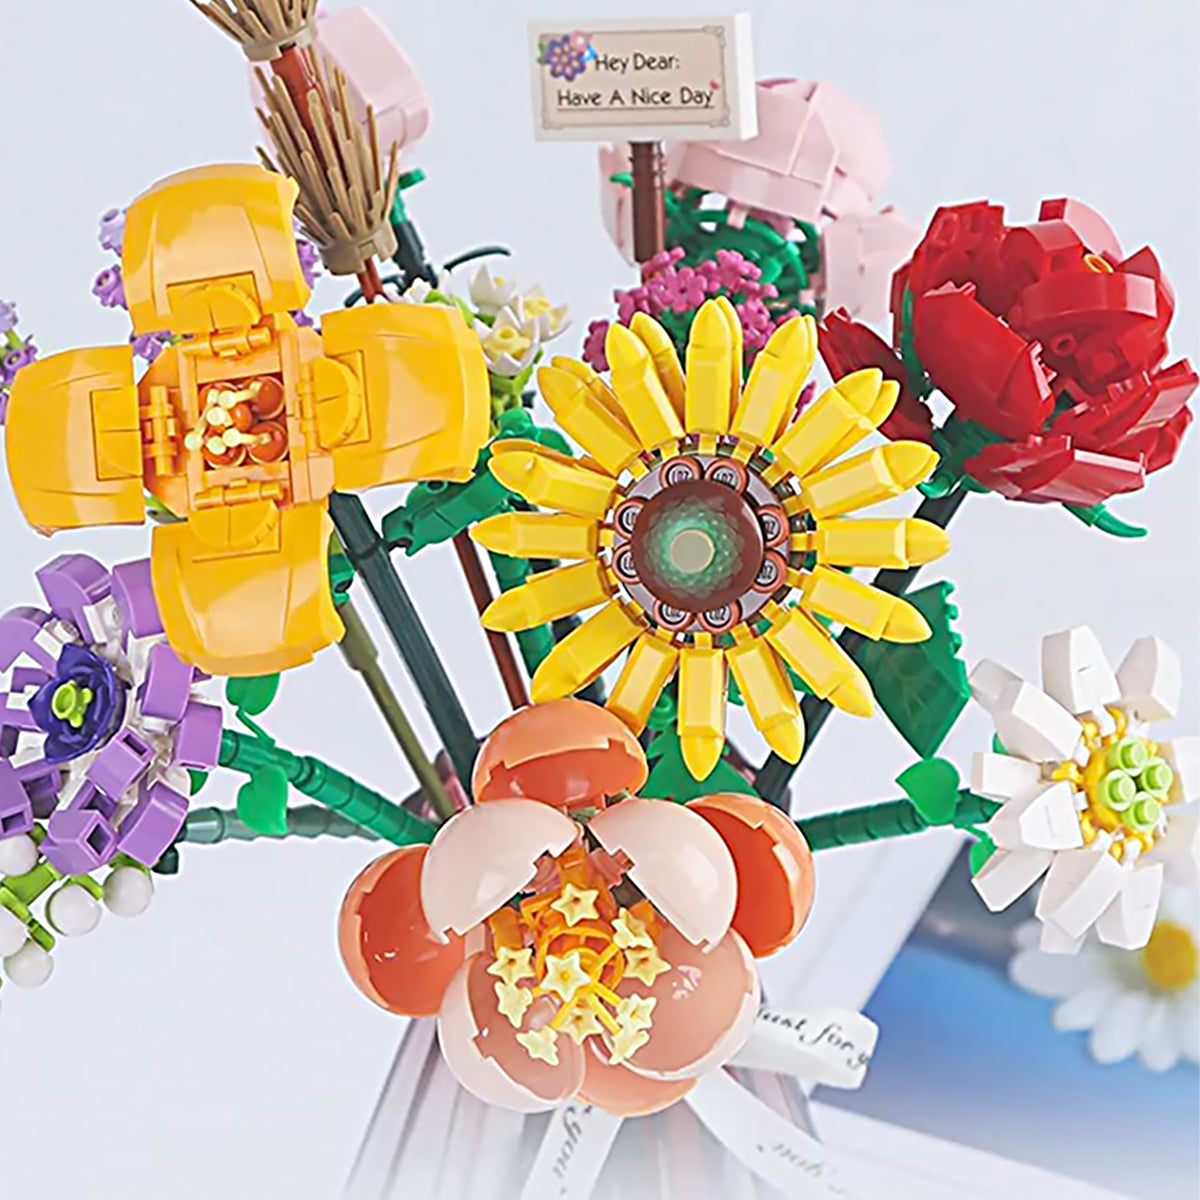 Build your own botanical masterpiece with this Flower Bouquet Building Block set